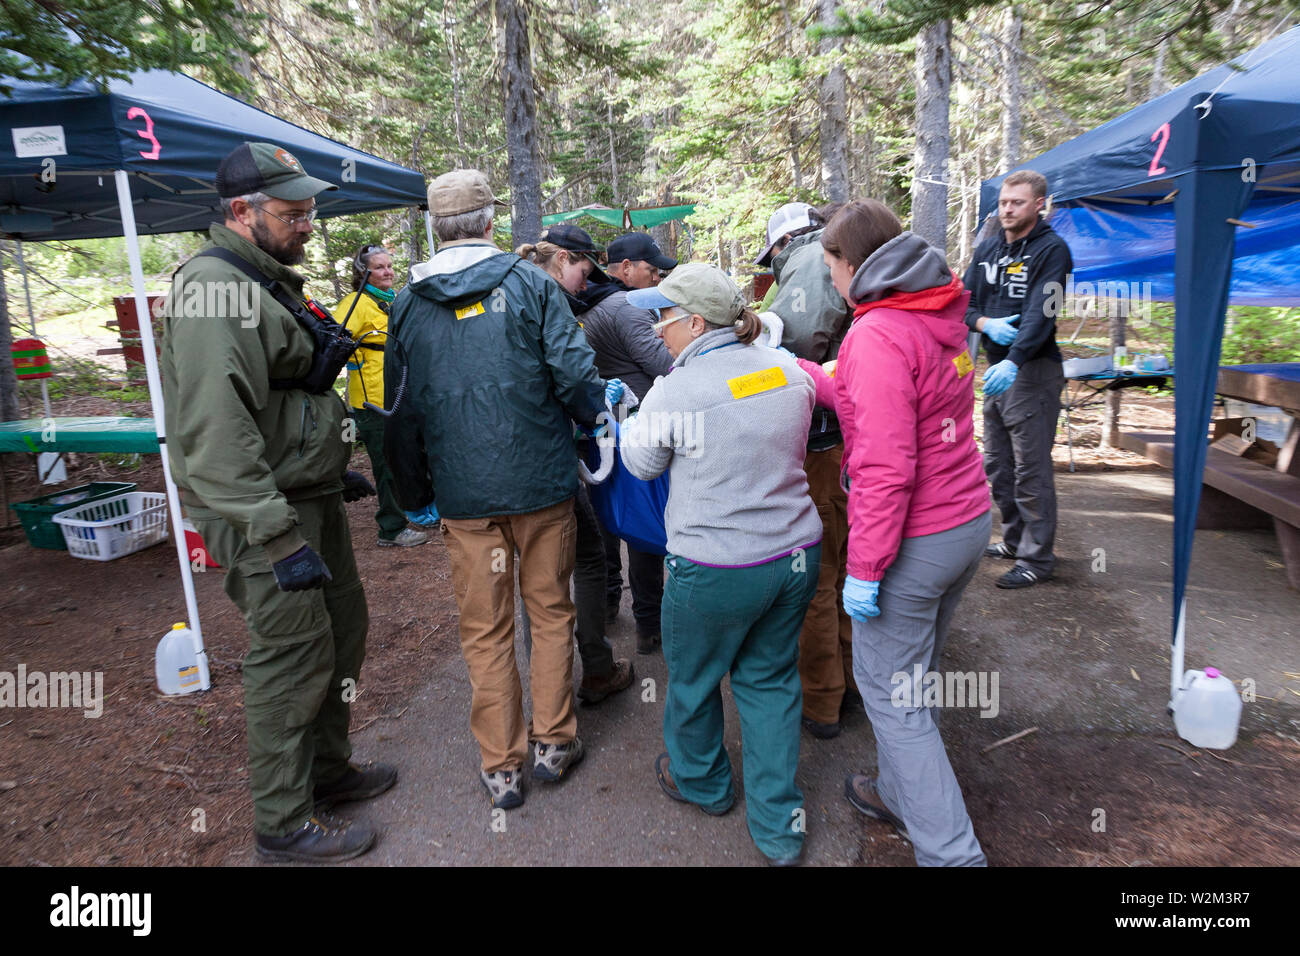 A team of rangers, employees and volunteers move a tranquilized mountain goat at Hurricane Ridge in Olympic National Park, Washington on July 9, 2019. Today is the second day of a two-week long capture and translocation process moving mountain goats from Olympic National Park to the northern Cascade Mountains. The effort is a collaboration between the National Park Service, the Washington Department of Fish & Wildlife and the USDA Forest Service to re-establish depleted populations of mountain goats in the Northern Cascades while also removing non-native goats from the Olympic Mountains. The a Stock Photo